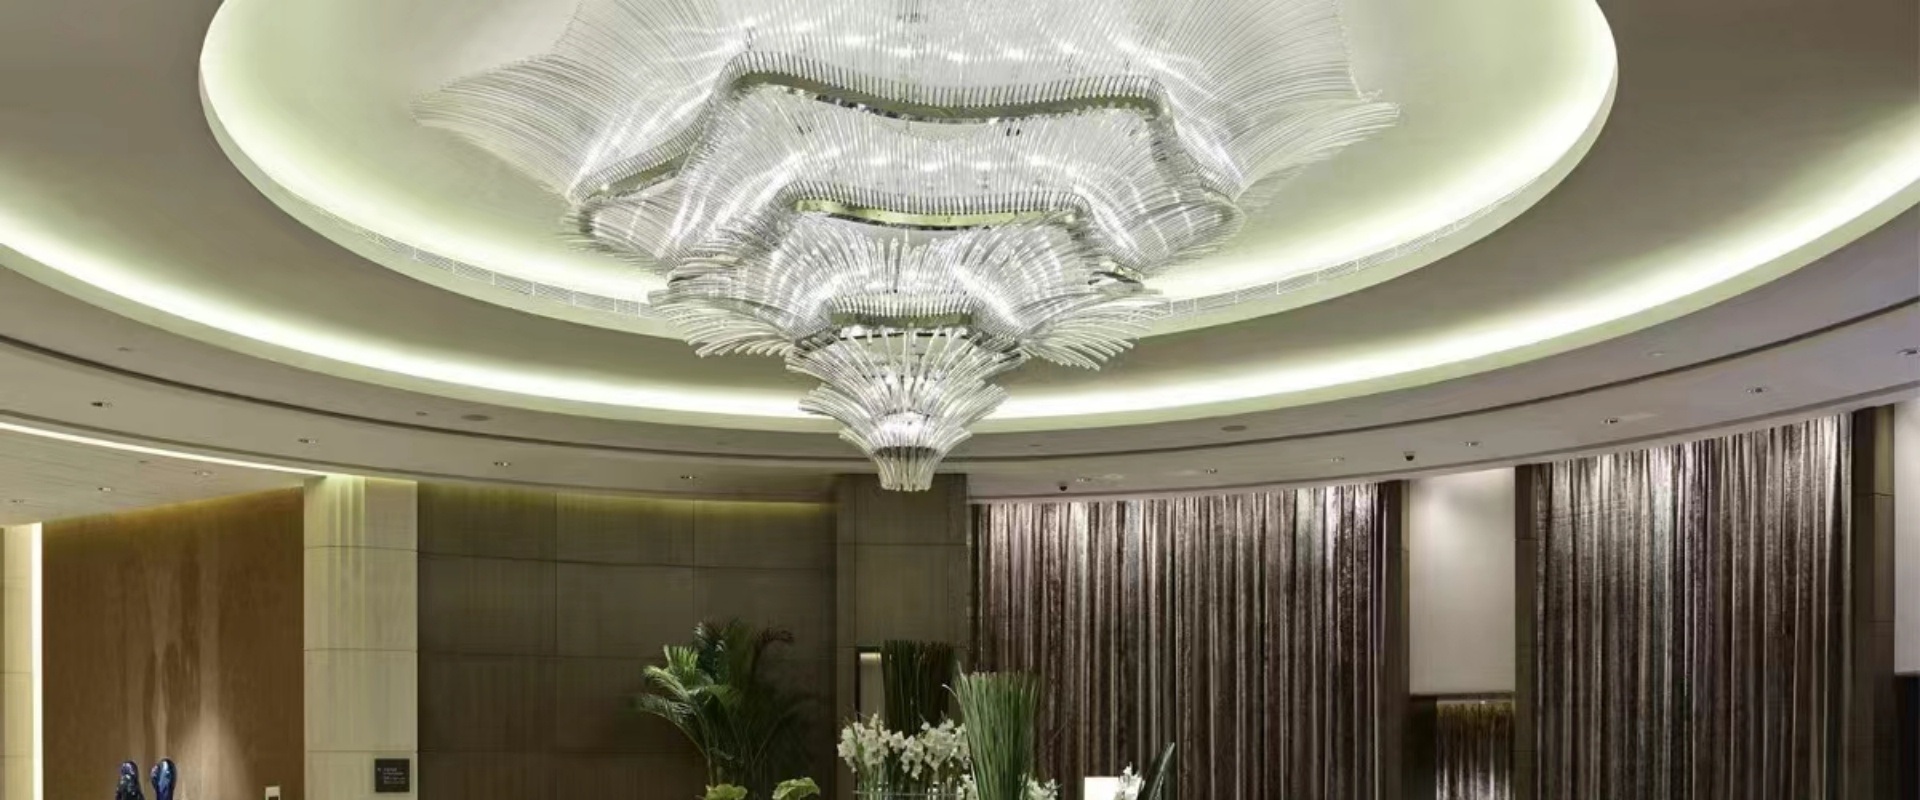 DUTTI LED South Africa | Chandelier Modern Unique Custom Pendant Ceiling Lighting Fixtures Non-standard OEM/ODM Glass Crystal Best Price